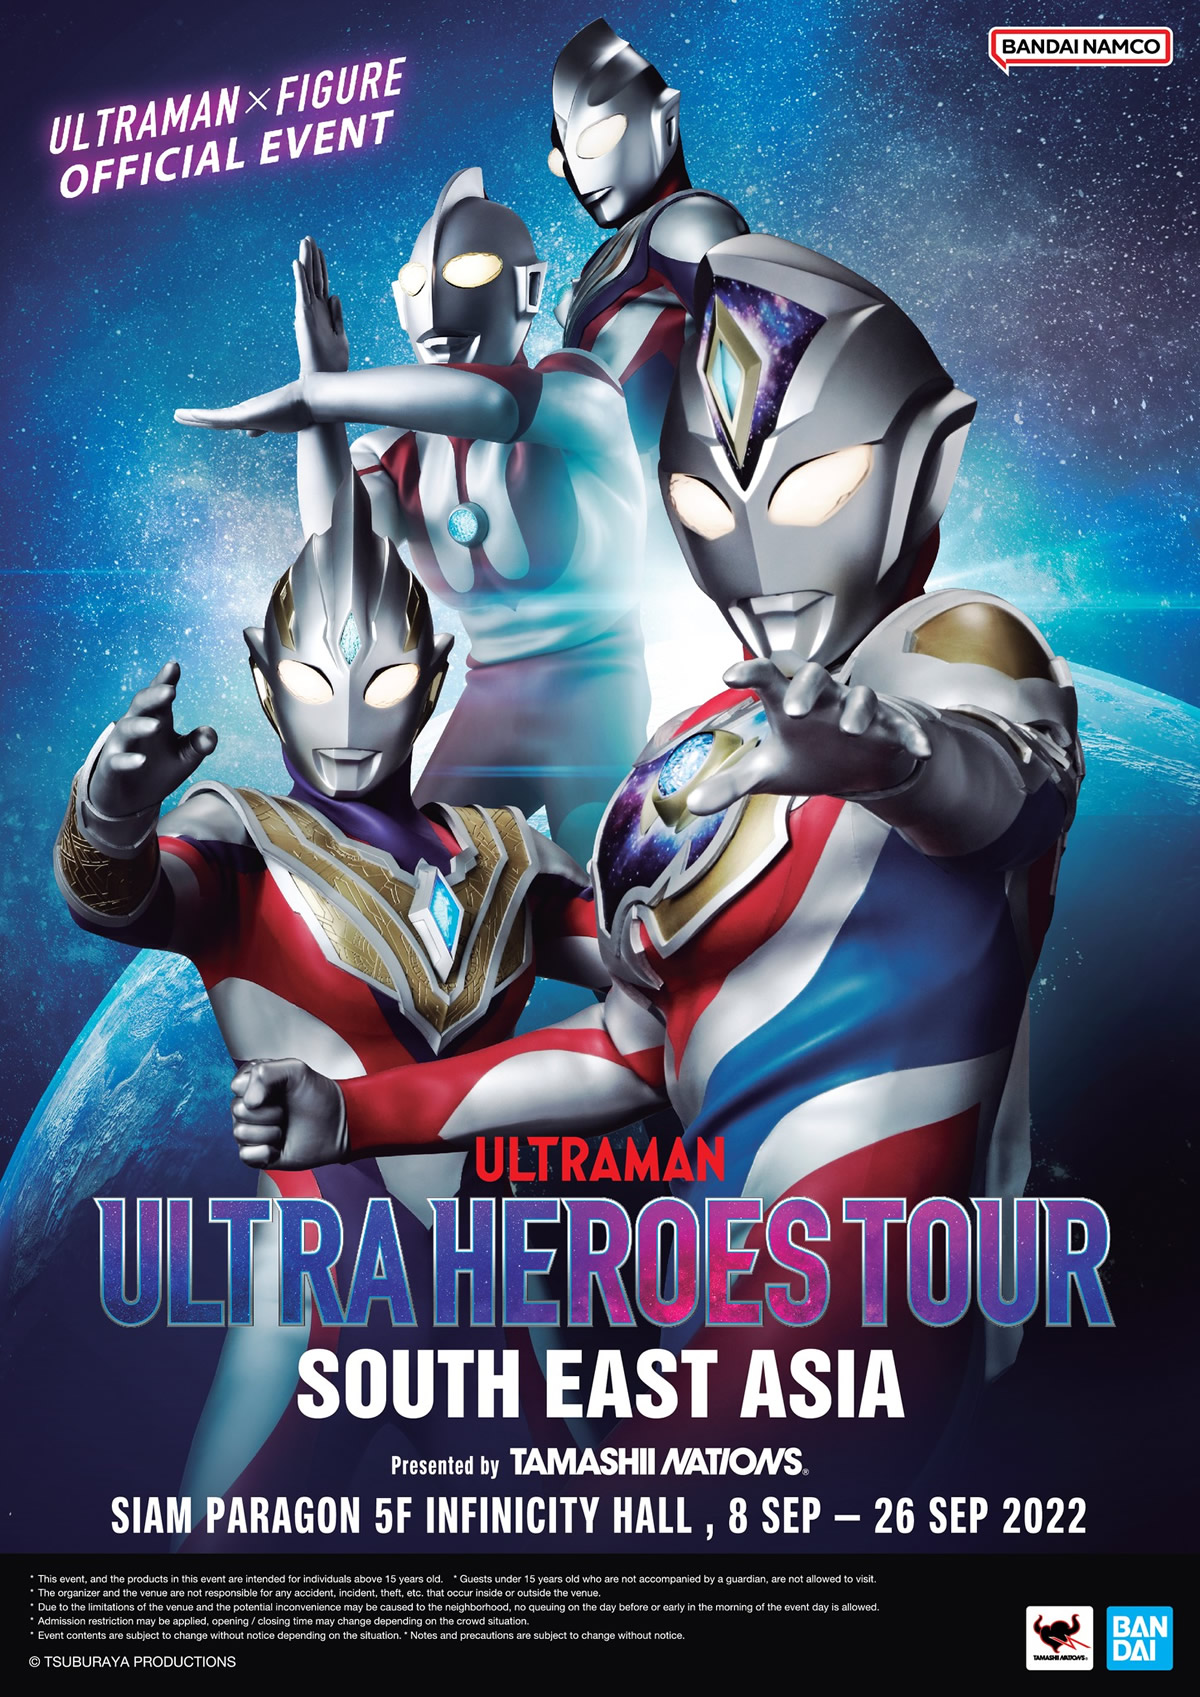 「ULTRA HEROES TOUR SOUTH EAST ASIA」がバンコク・サイアムパラゴンで9月8日より開催